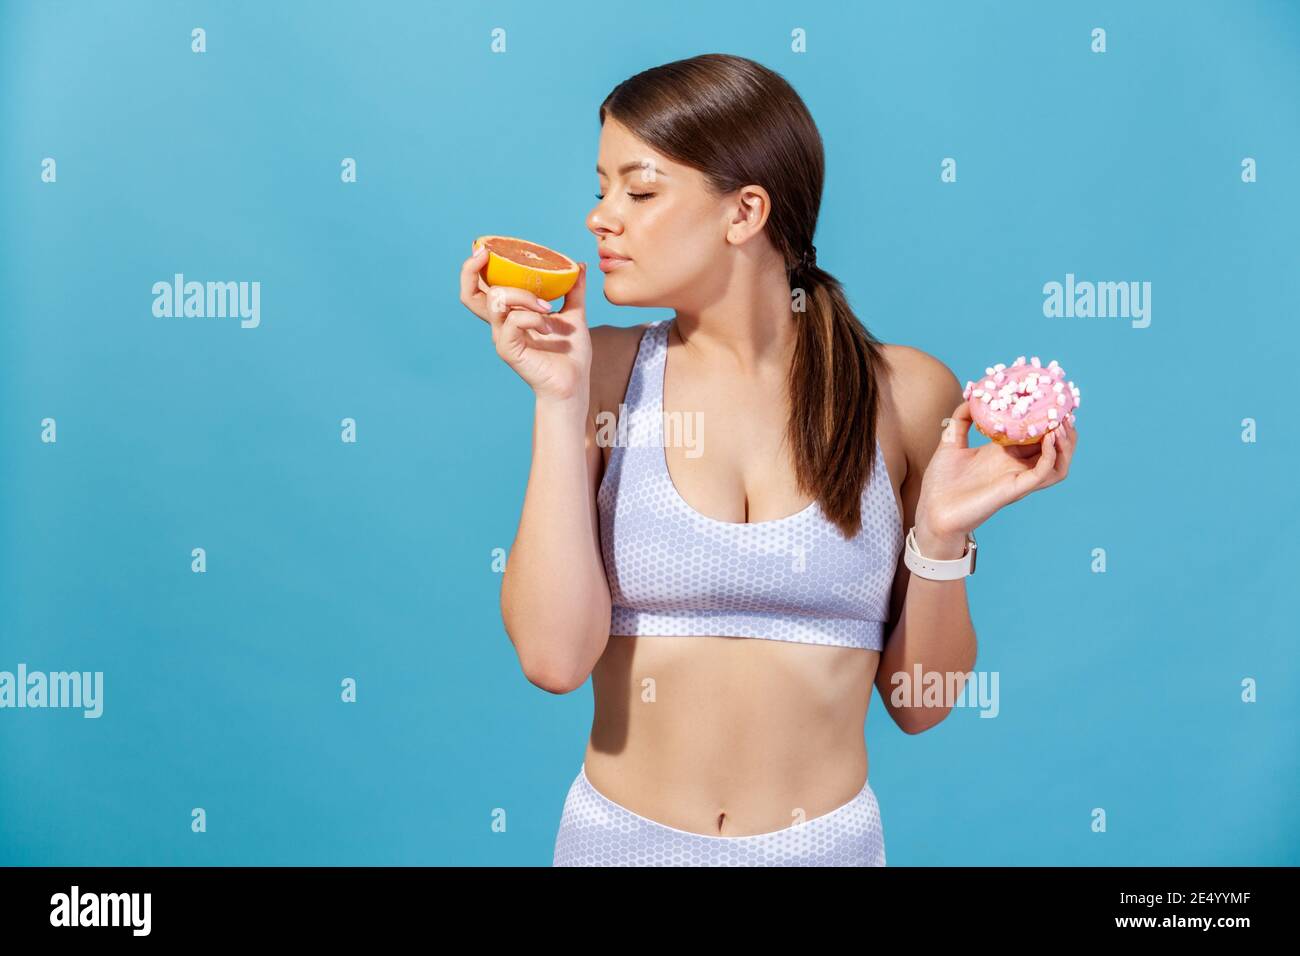 Sportive woman in white top holding in hands half of juicy grapefruit and round donut with pink icing, enjoying fresh aroma of ripe fruit. Indoor stud Stock Photo